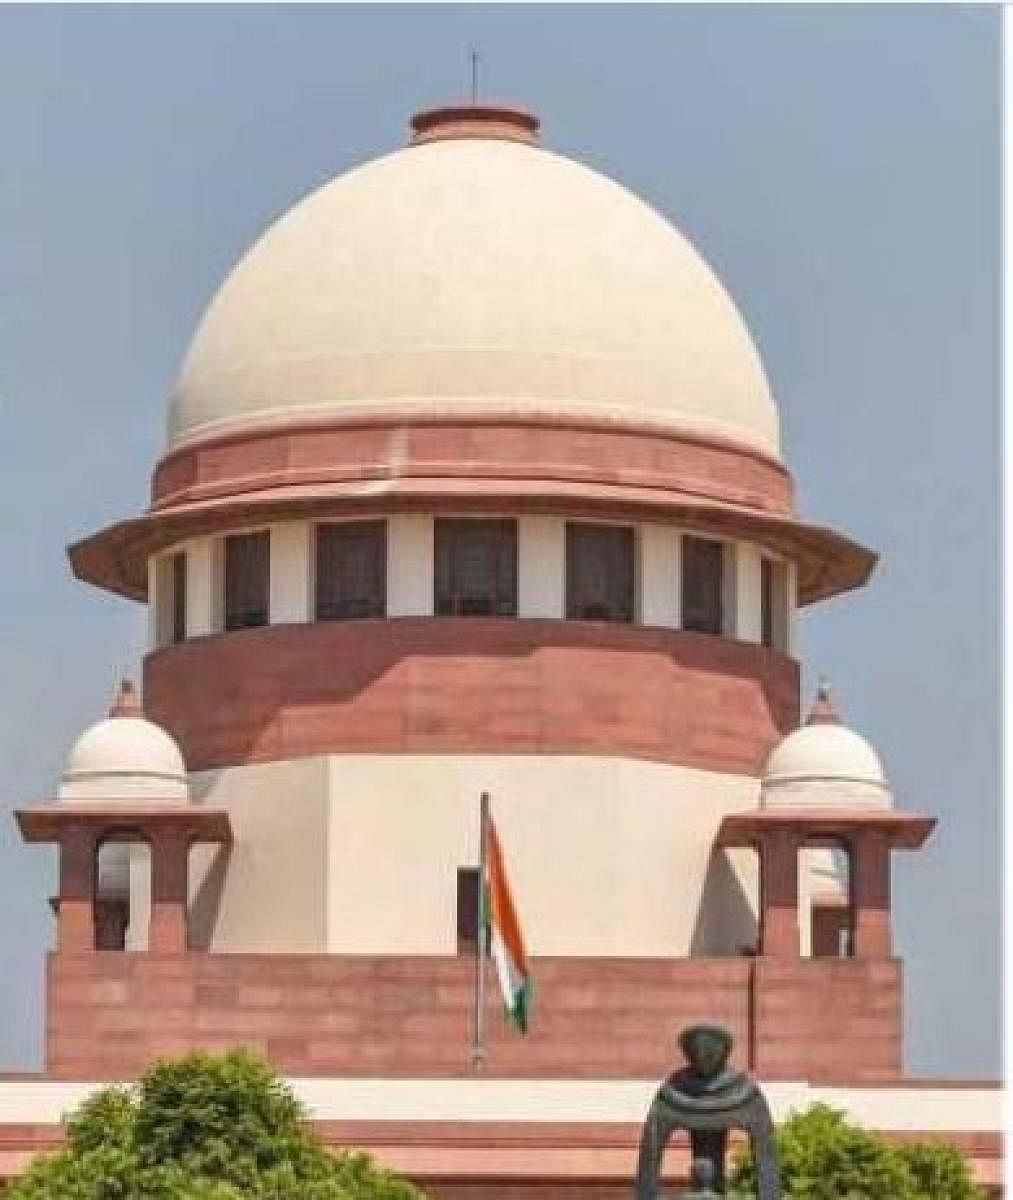 The Supreme Court on Friday refused to stay the West Bengal government's order to allocate and grant Rs 28 crore to Durga Puja organisers in the state, and instead, issued a notice to the the Mamata Banerjee government to respond on the plea.